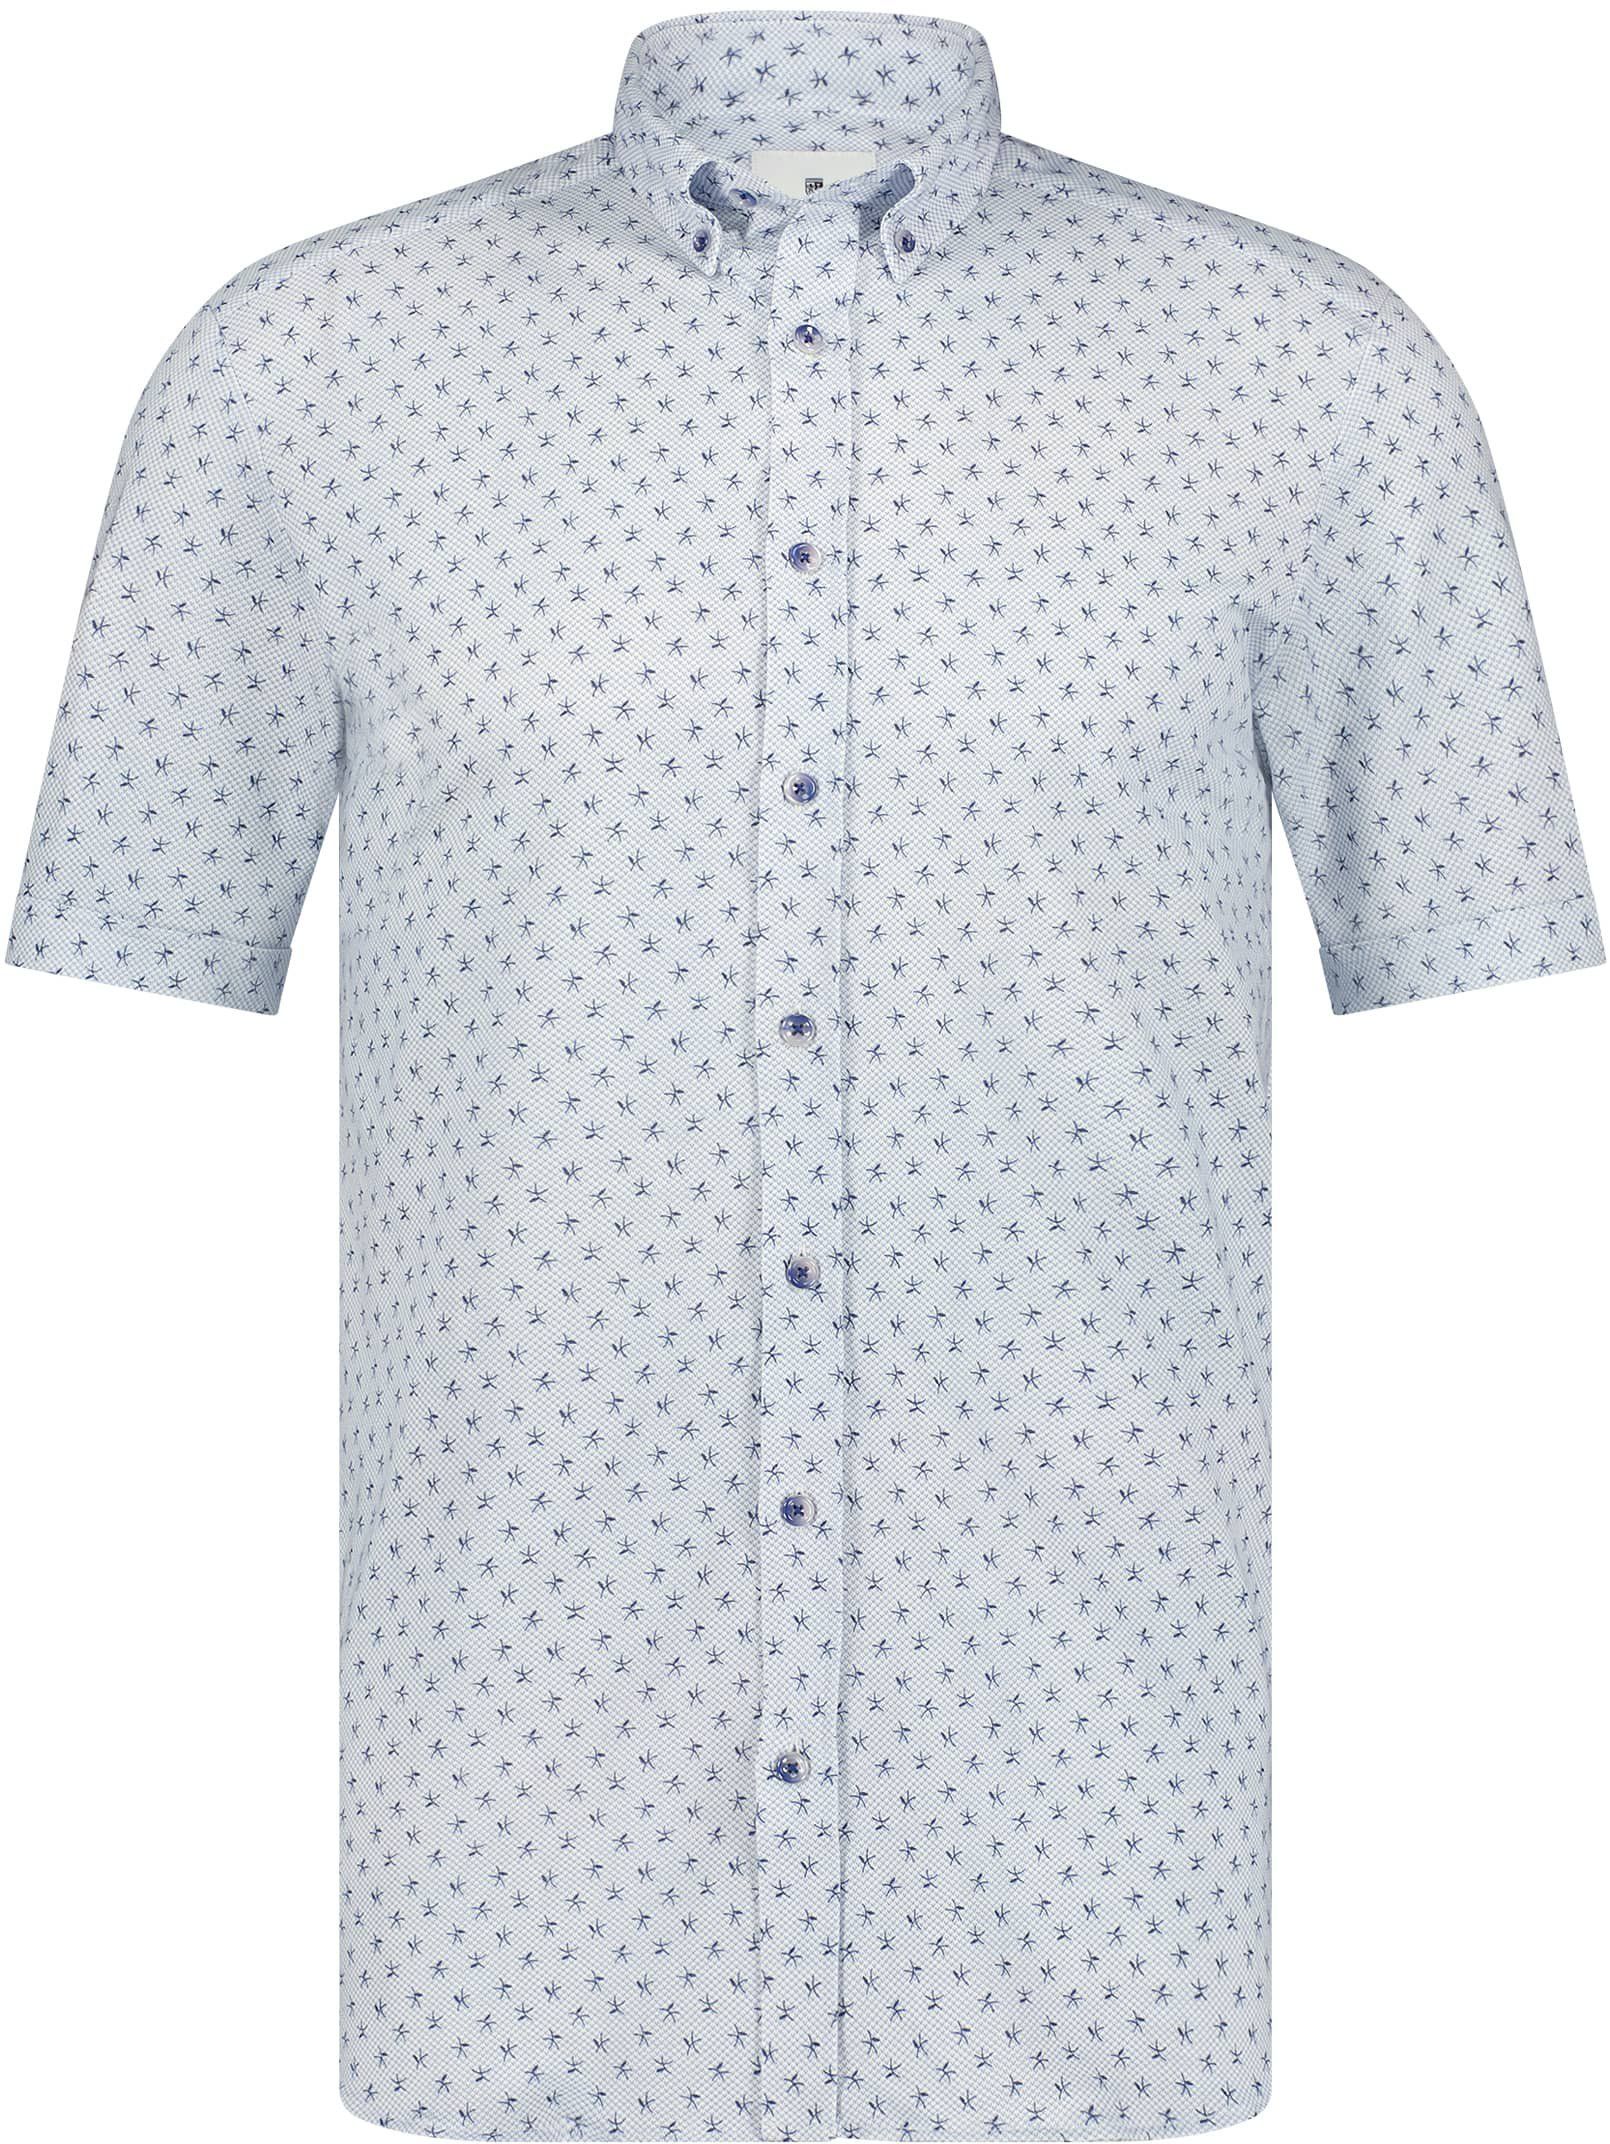 State Of Art Short Sleeves Shirt Print Blue size M